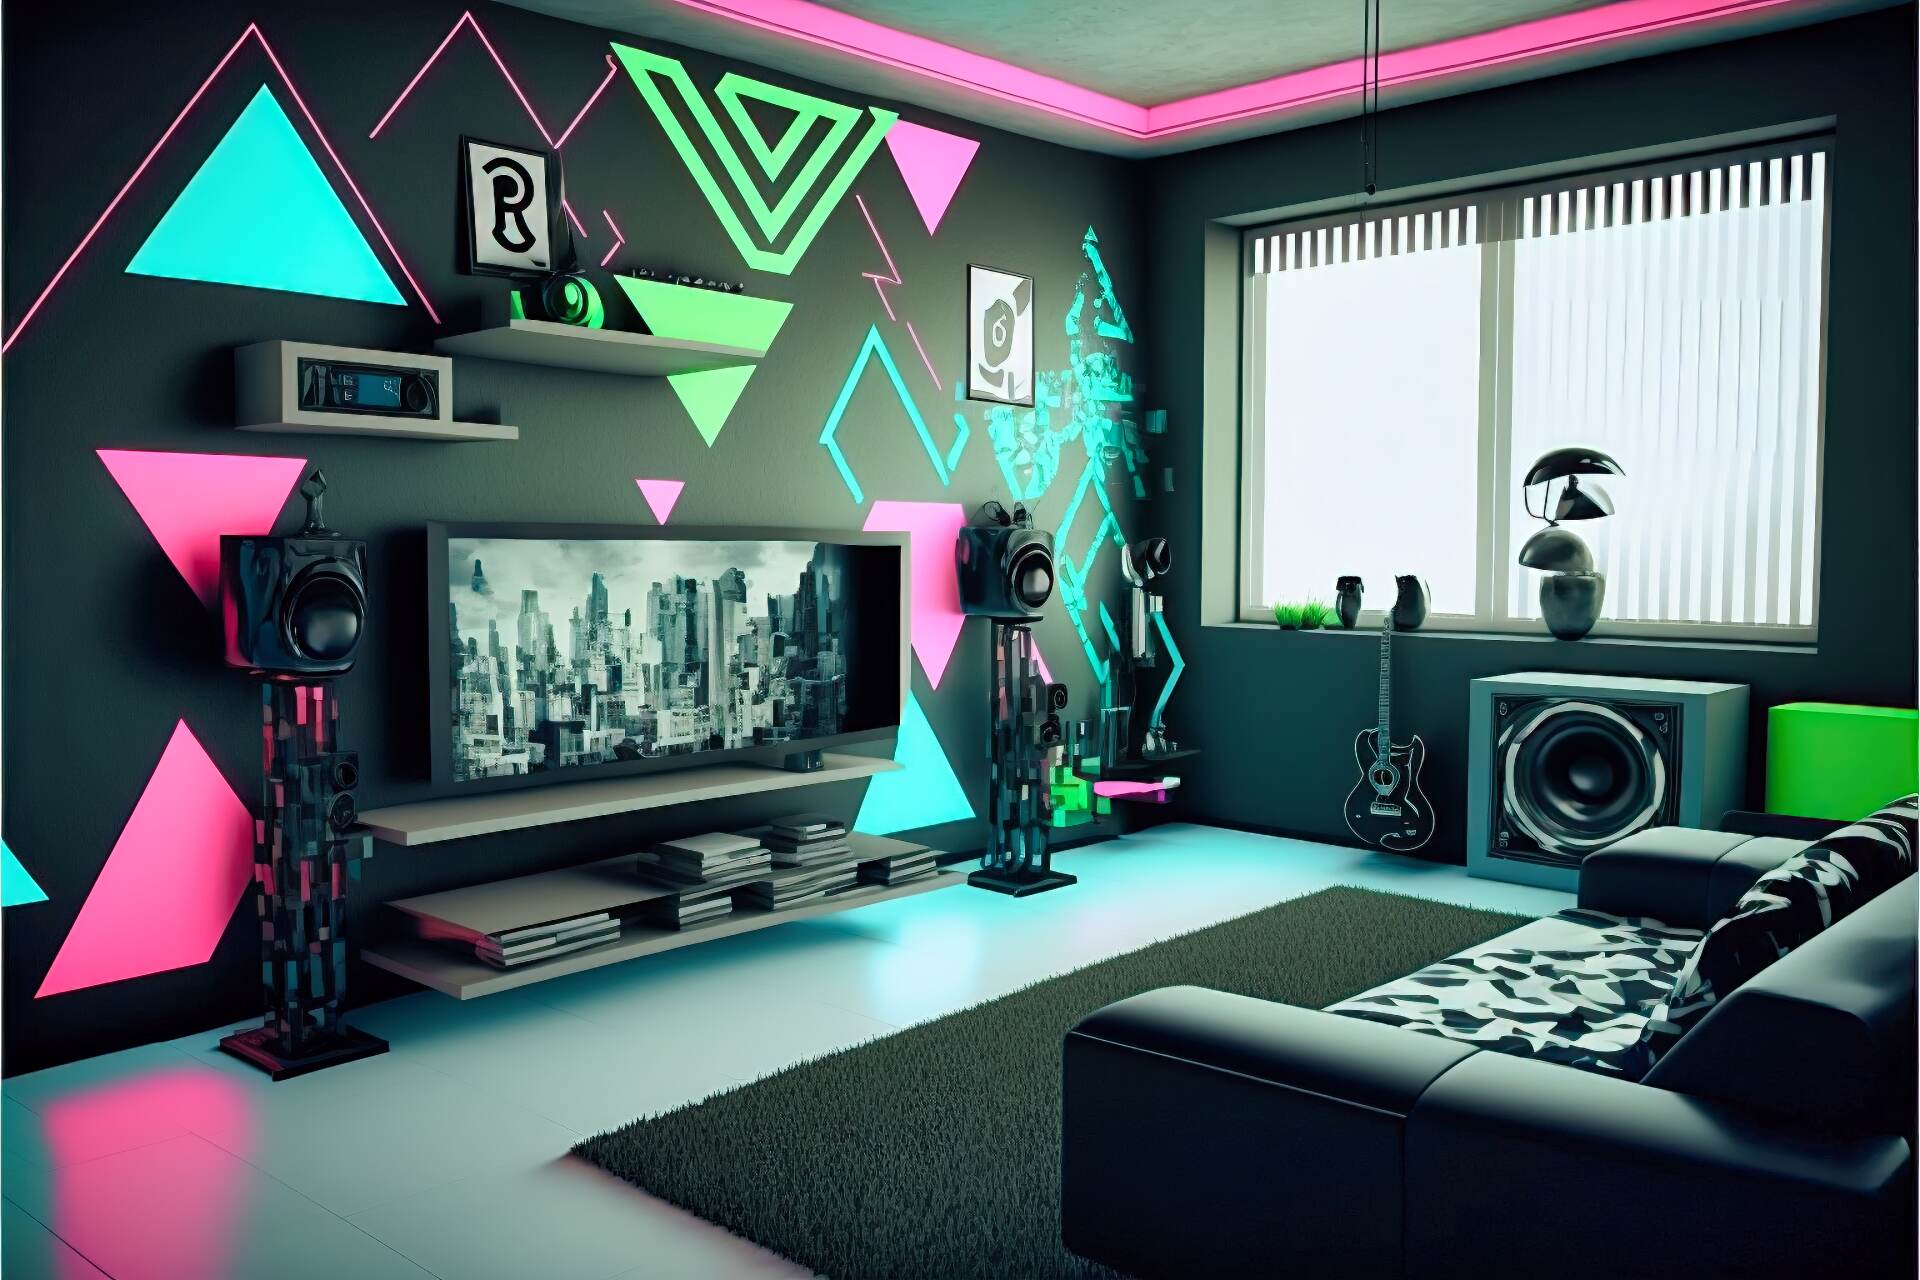 A Cyberpunk-Style Living Room With A Neon Techno Vibe. The Walls Are Painted Black And Adorned With Neon Lights In Various Shapes And Colors. The Furniture Is Made Up Of Angular And Geometric Pieces In A Monochromatic Color Scheme Of Black And Silver. A Large Flat Screen Tv Is Mounted On The Wall, Surrounded By More Neon Lights. A High-Tech Sound System And A Holographic Gaming Console Complete The Look.